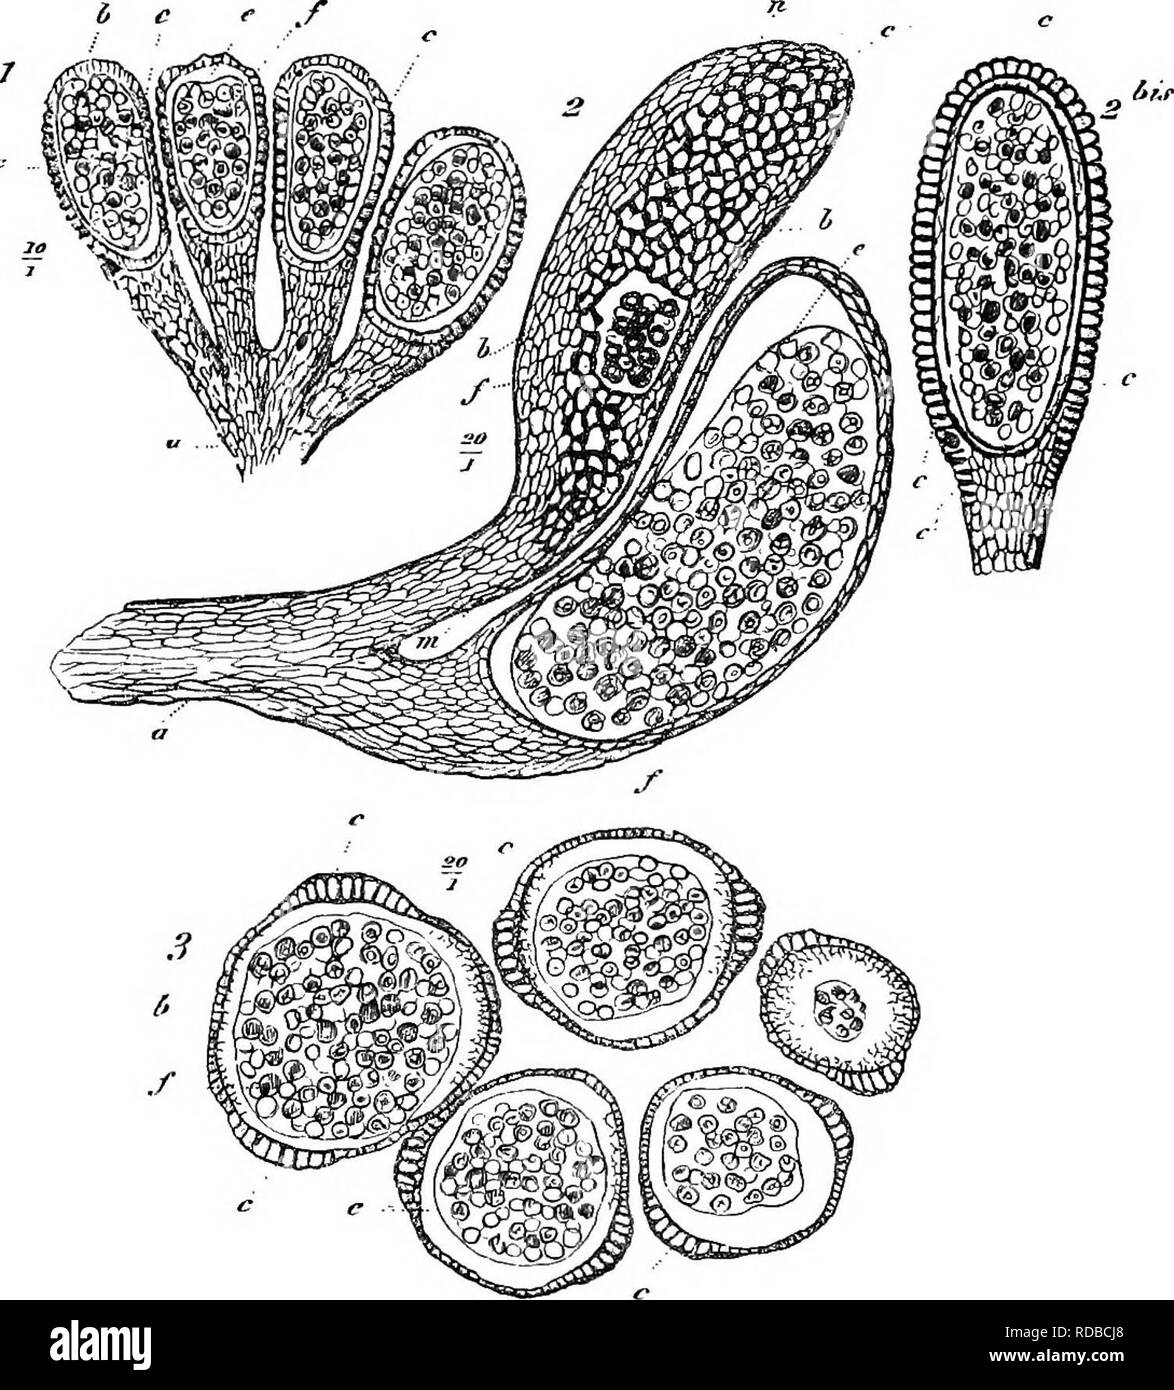 . Studies in fossil botany . Paleobotany. 32° STUDIES IN FOSSIL BOTANY least two layers of cells, of which the inner, more delicate layer has usually perished. The outer wall. Fig. 119.—Zygoftteris, sp.   1. Group of four sporangia, on a common pedicel (a) x 10. i. Two sporangia on pedicel. The uppei shows the annulus (c) in surface -view, with spores exposed aty&quot;; the lower is in section. X 20. 2 bis. Sporangium, cut in plane passing through annulus. 3. Group of sporangia in transverse section. X 20. Lettering common to the figures : a, common peduncle ; b, sporangial wall ; &lt;,-, annu Stock Photo